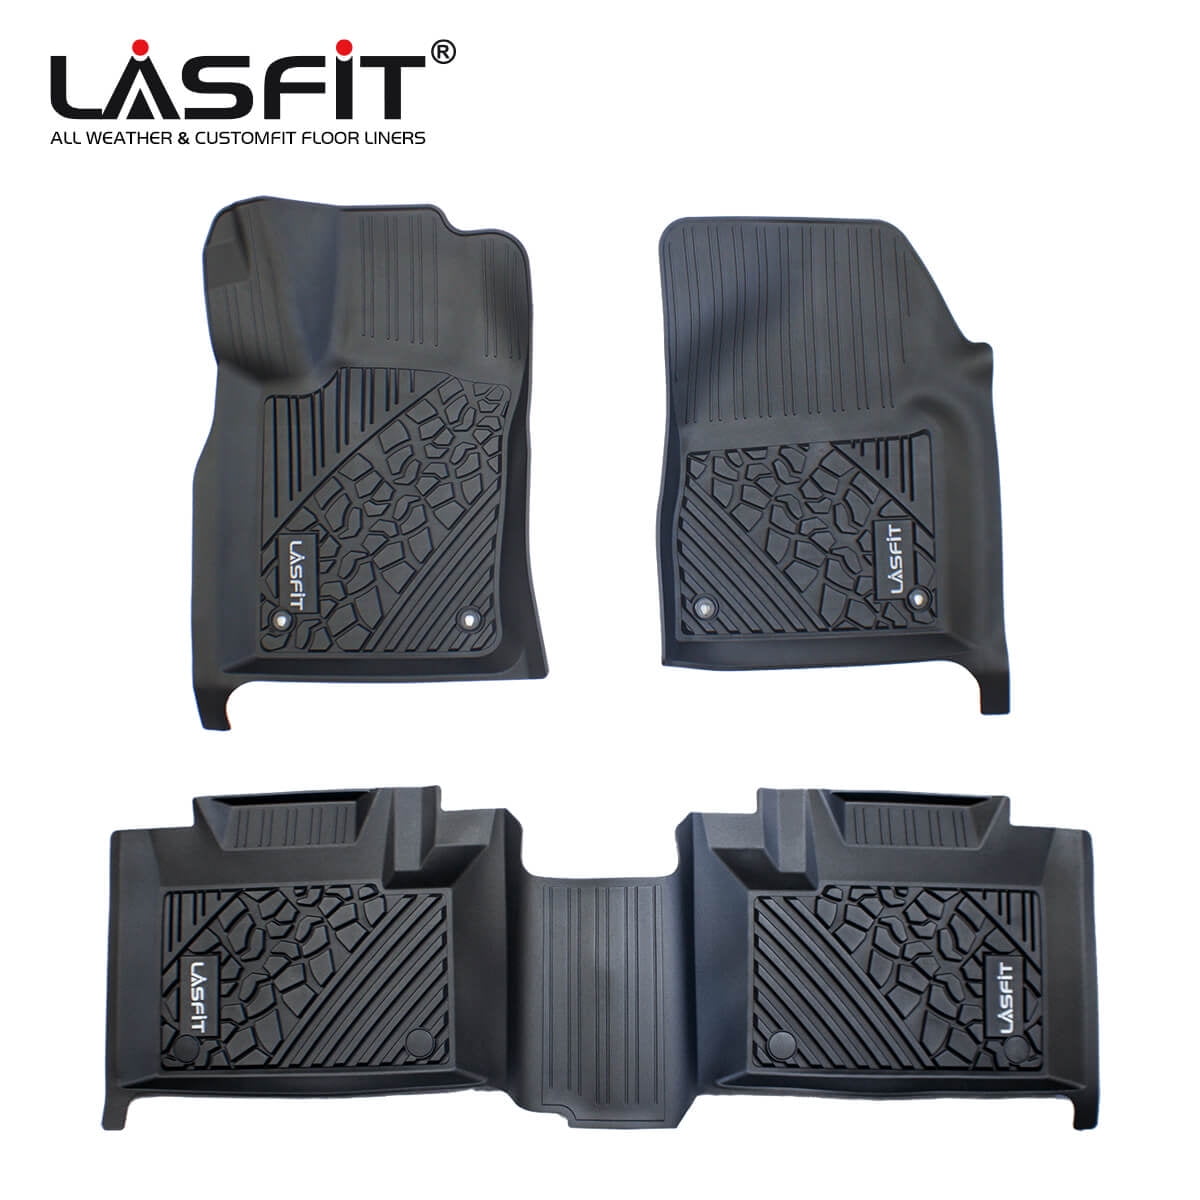 Lasfit Floor Liners for 2013 2014 2015 Dodge Durango (2nd Row Bench Seat Only) / Jeep Grand 2014 Dodge Durango All Weather Floor Mats